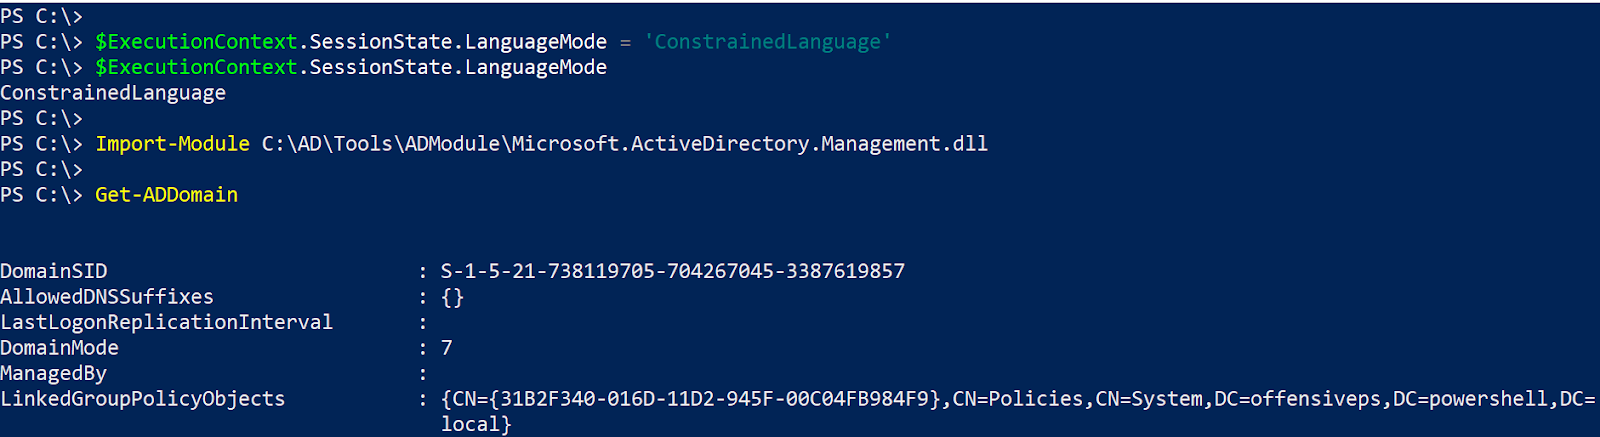 advantages of windows powershell managing active directory pdf